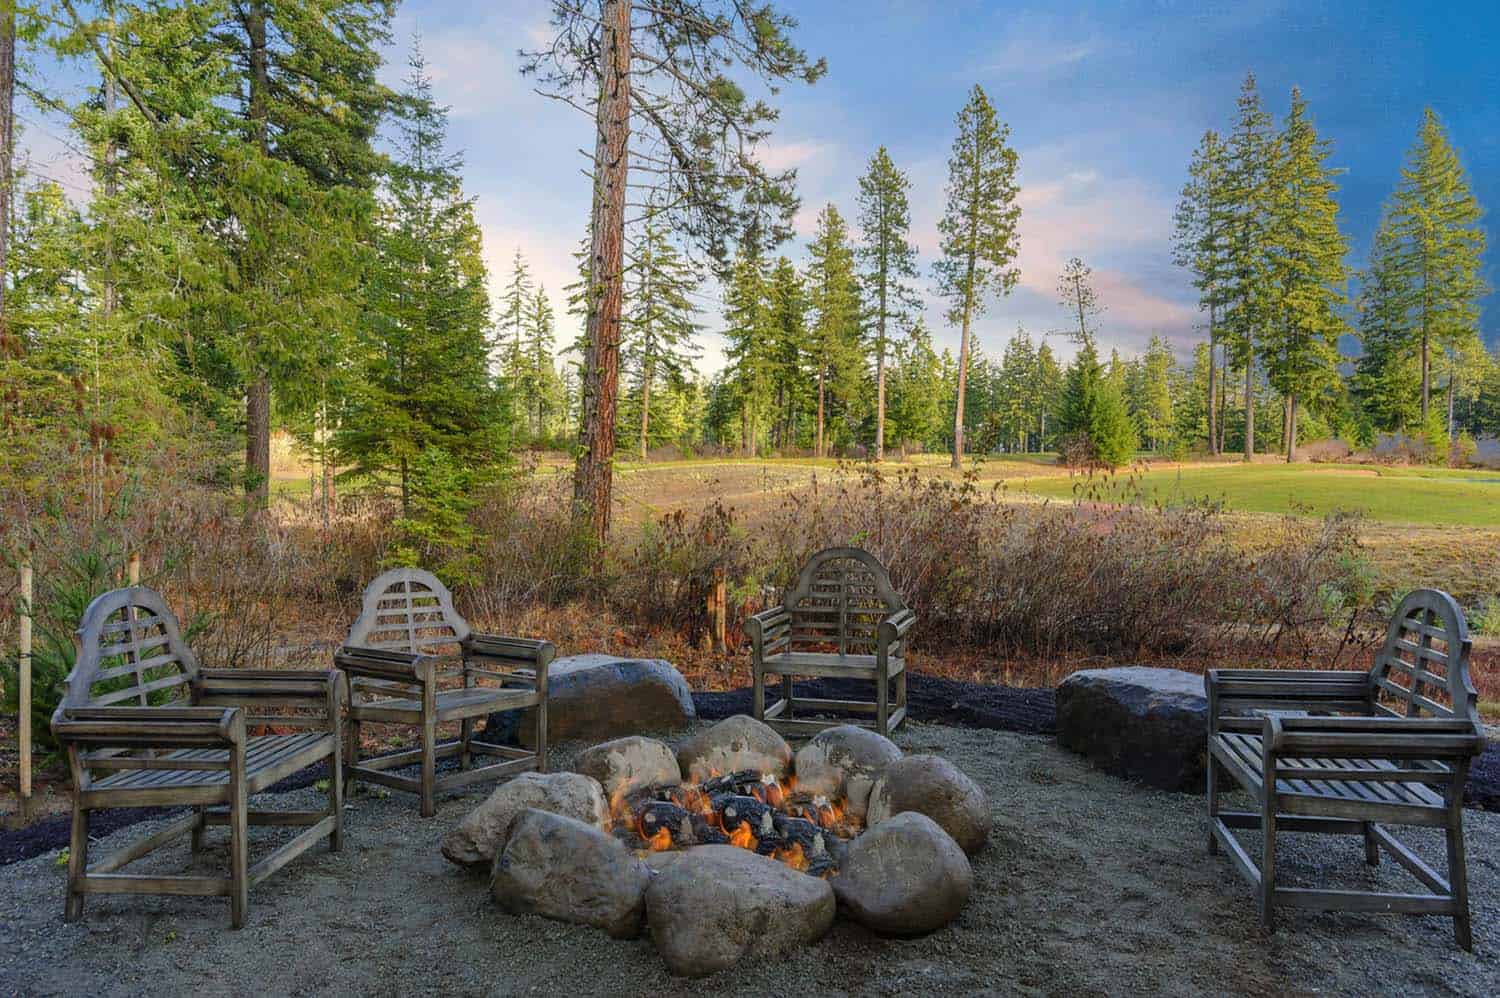 28 Inspiring Fire Pit Ideas To Create A, Building A Fire Pit With Natural Rocks